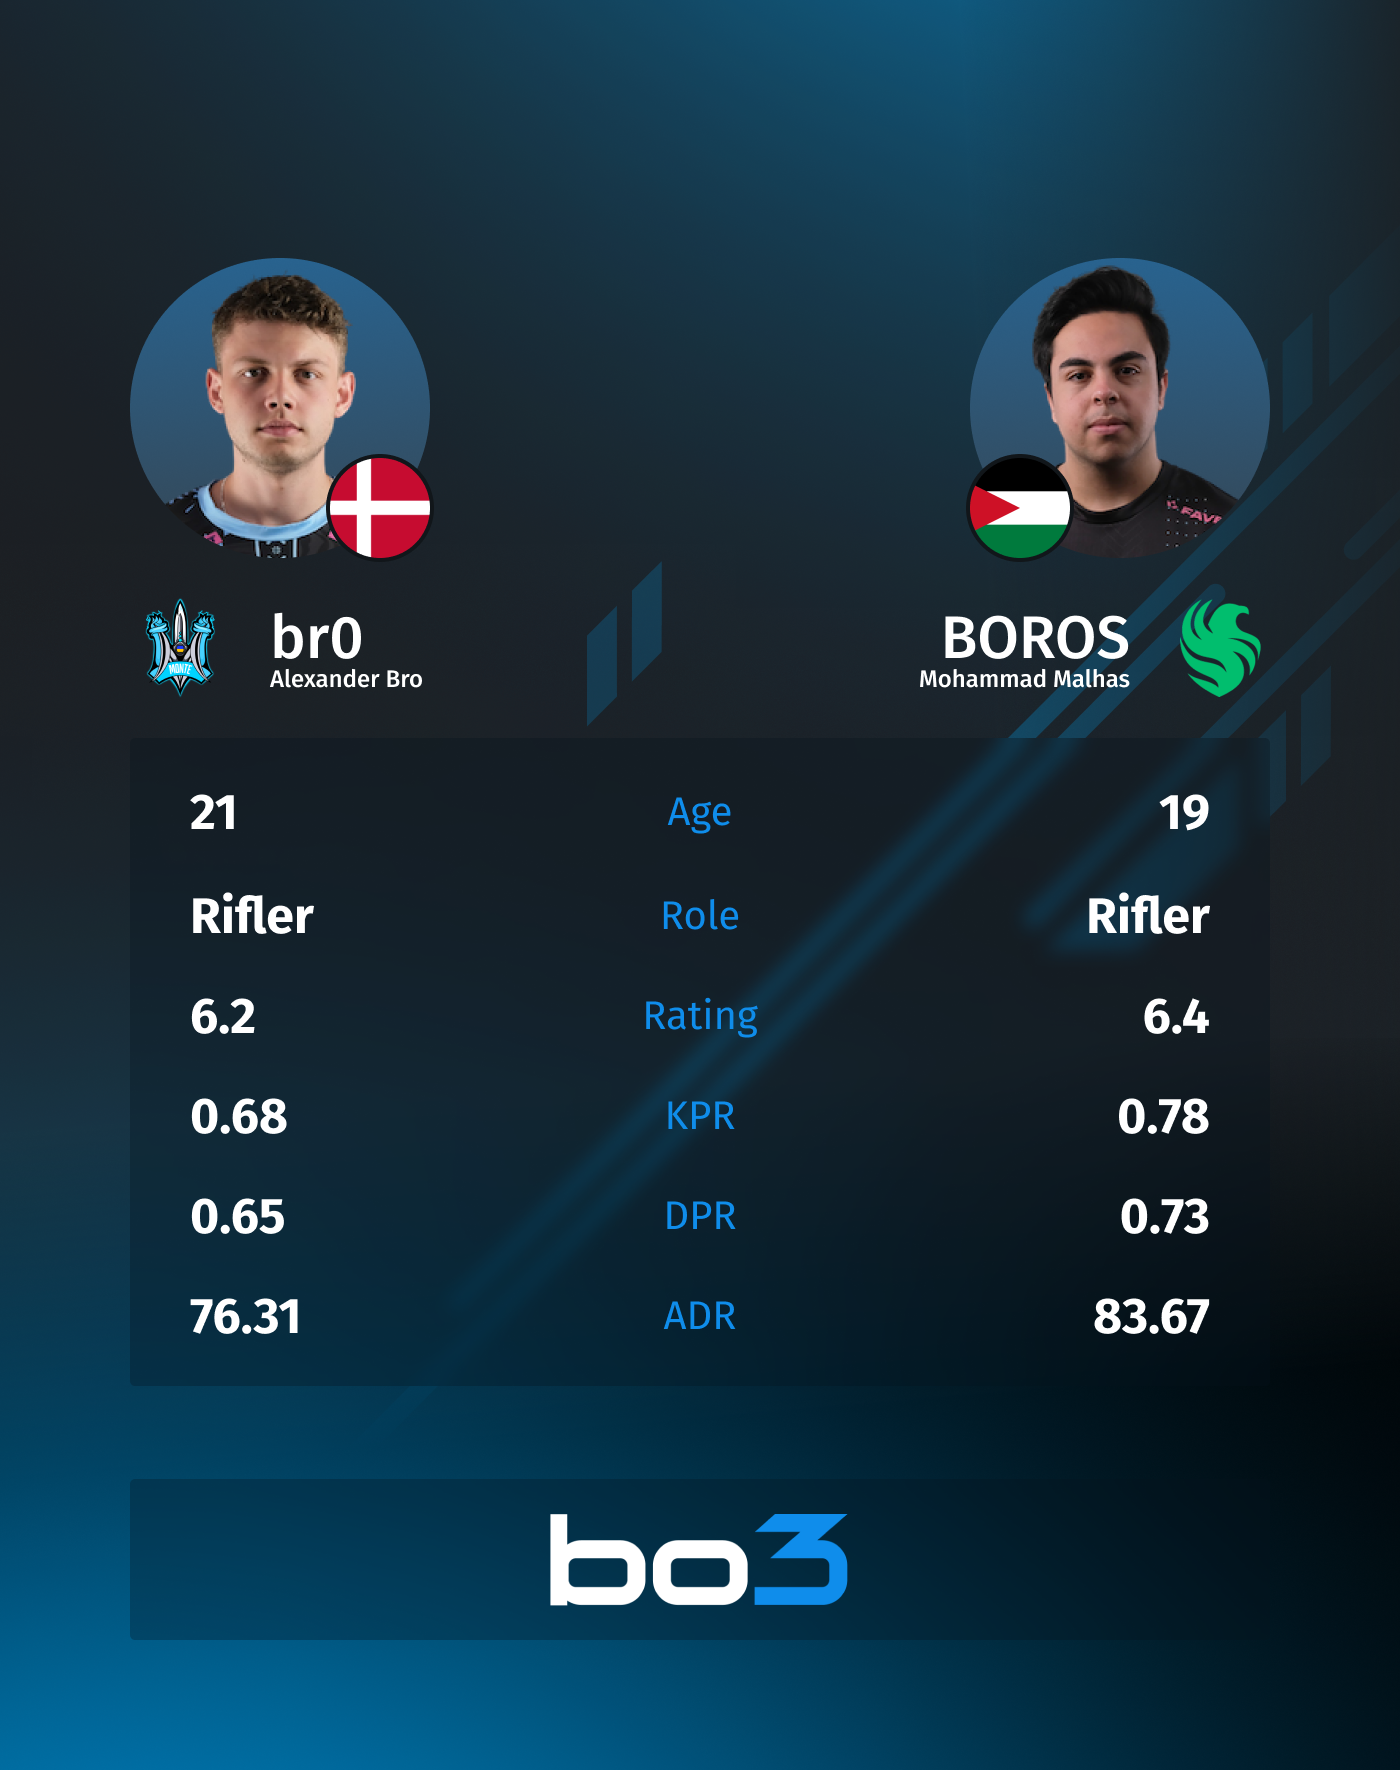 Br0 and BOROS statistics for the last six months